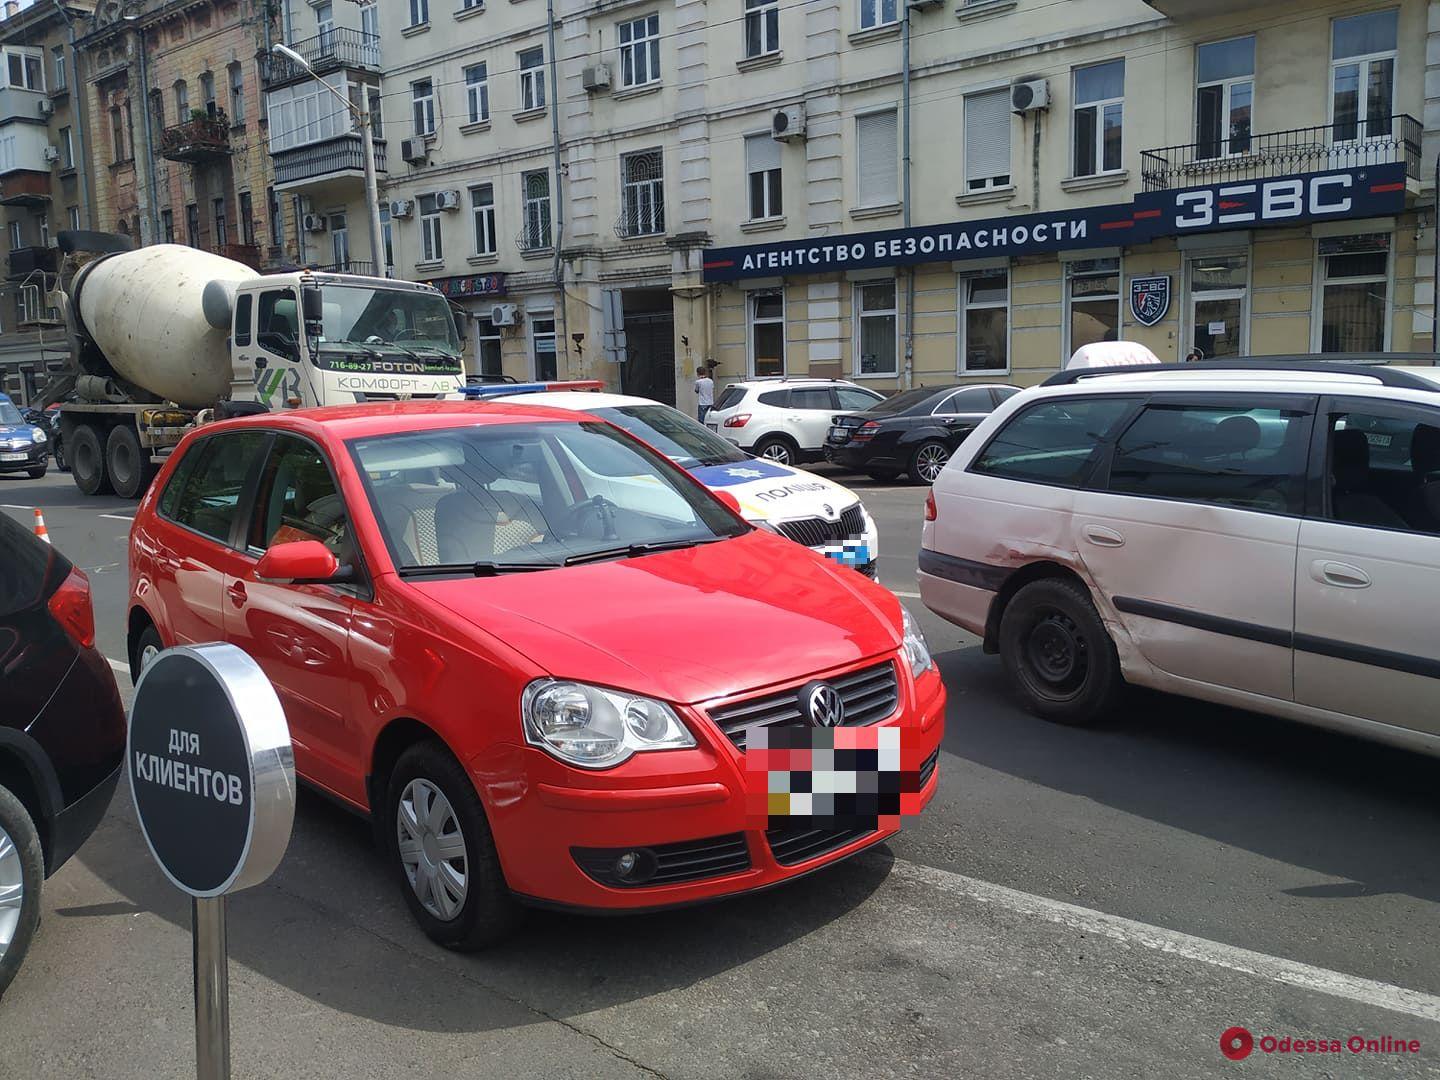 In the center of Odessa two cars collided